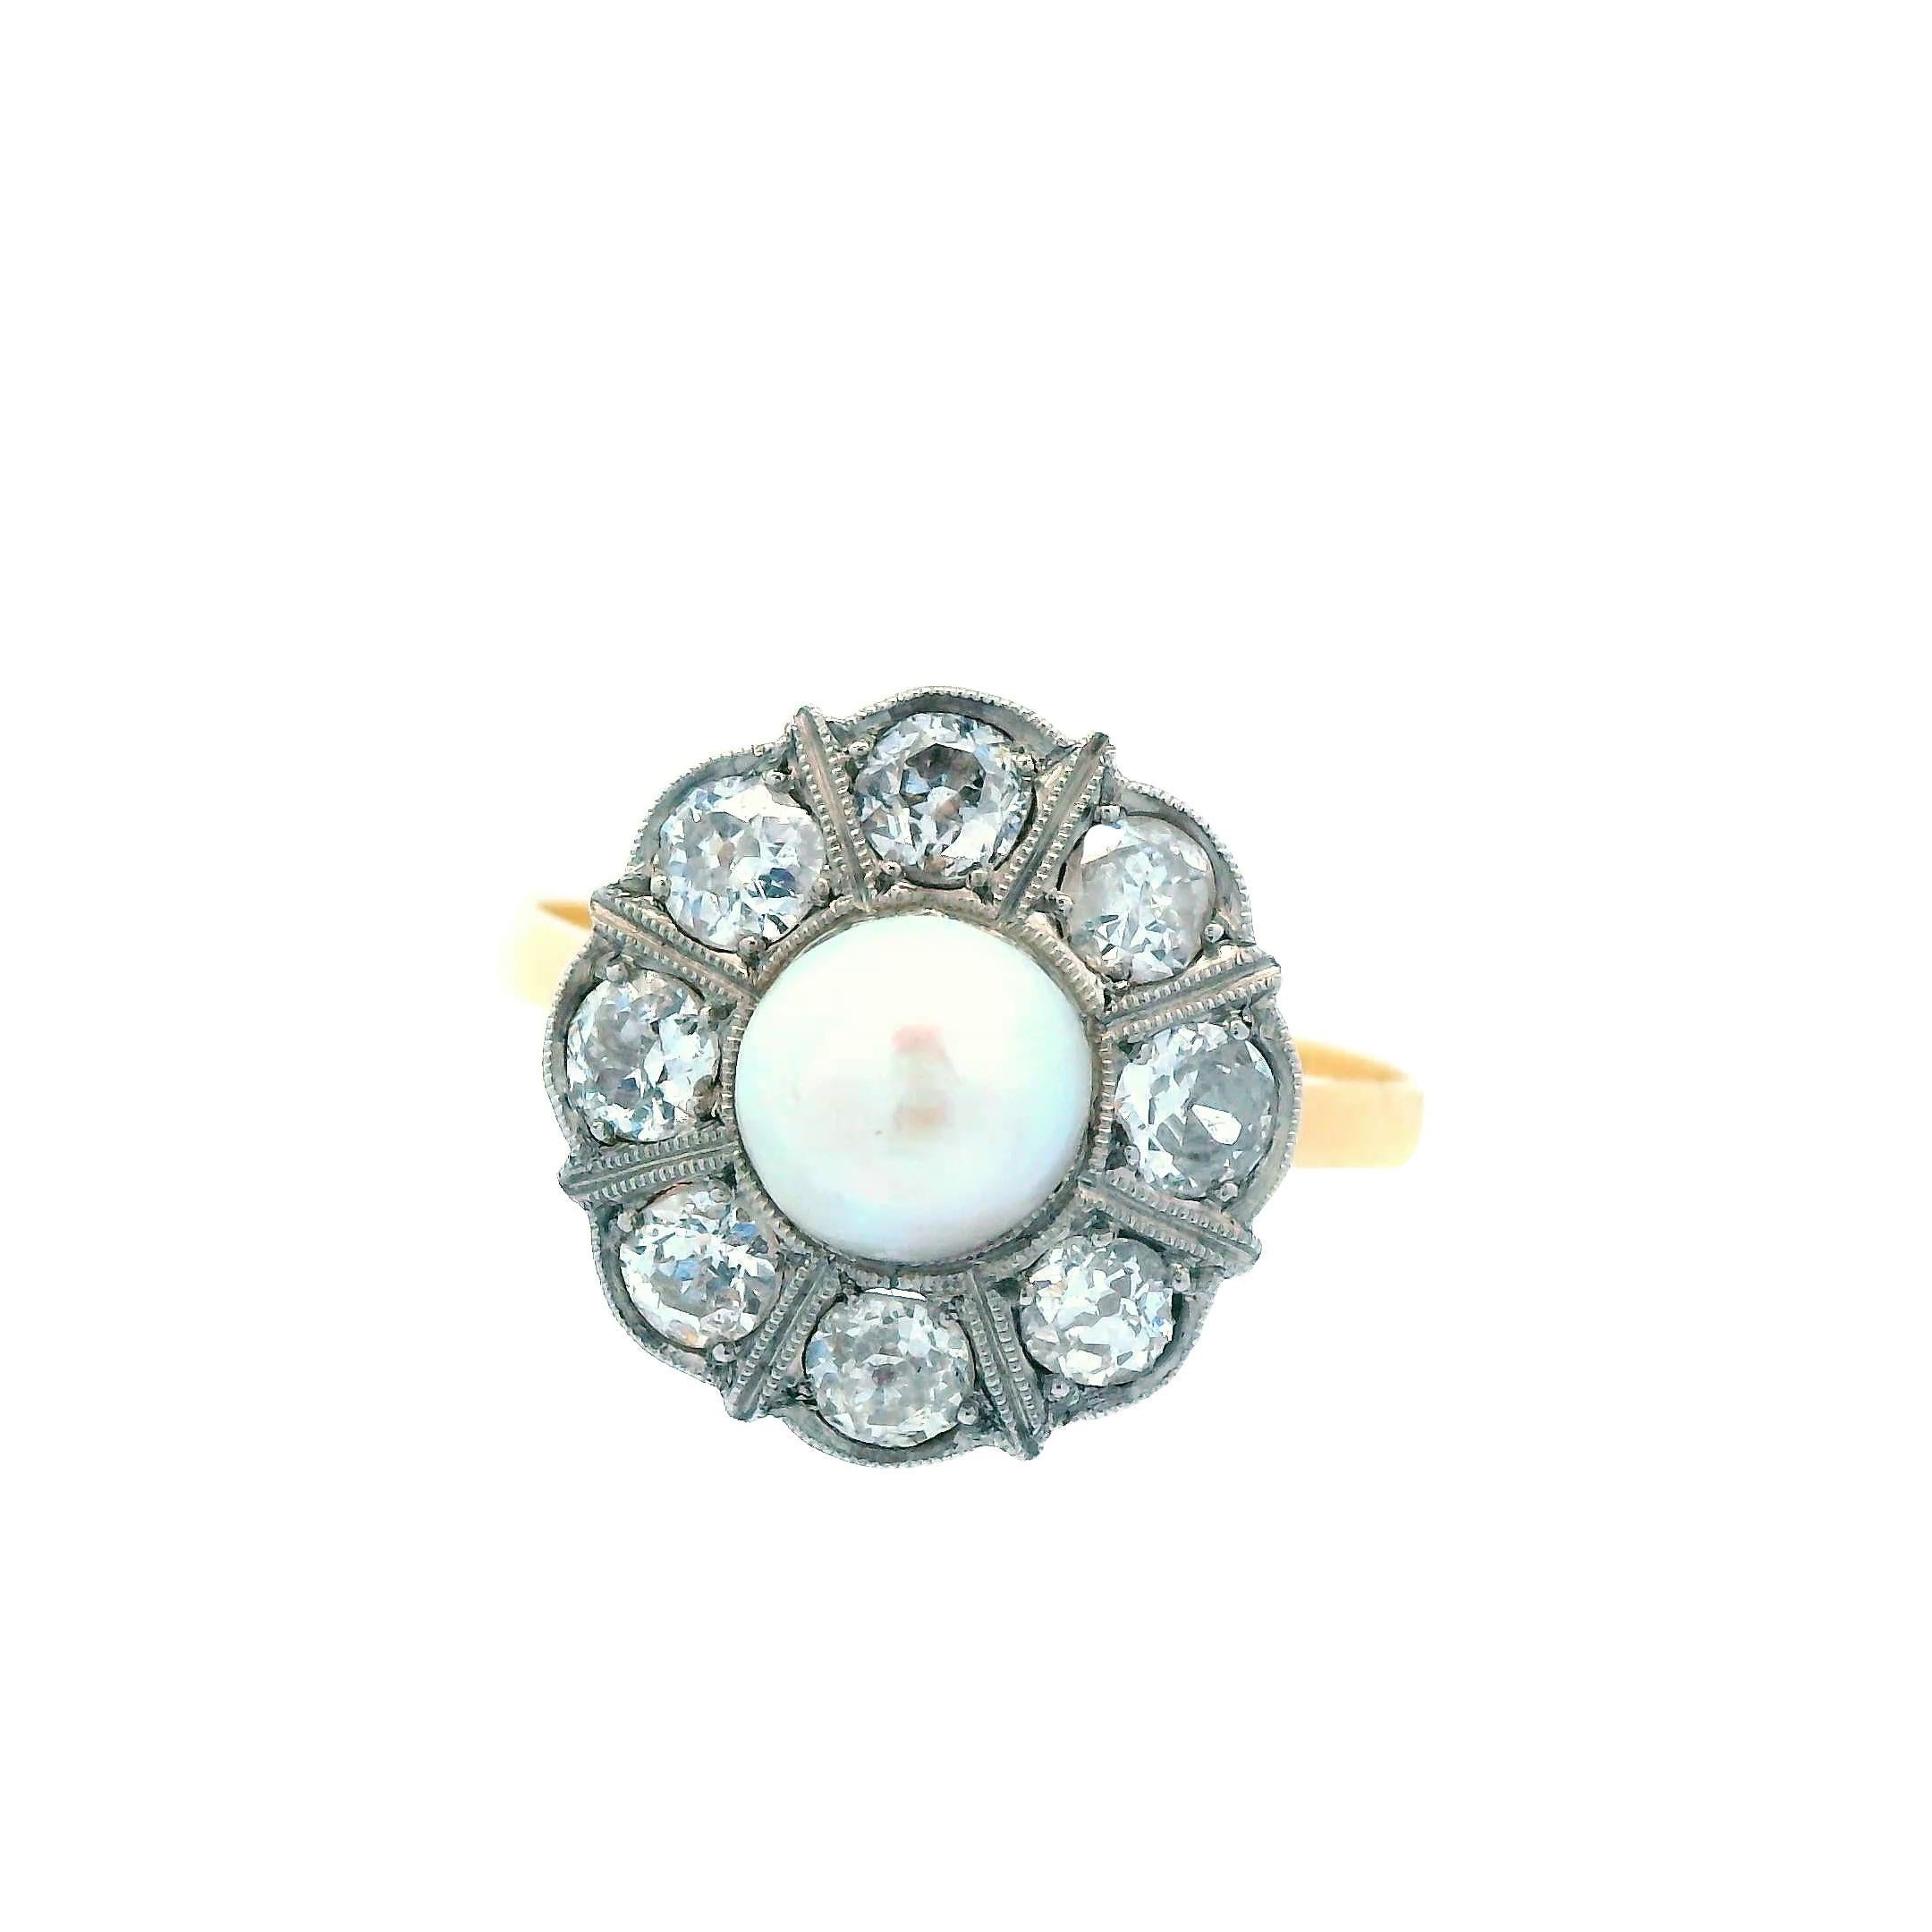 This beautiful two tone Edwardian ring from 1910 is made in 18k yellow gold over platinum and houses both diamond and natural pearl. The ring is size 6.5 but can be resized upon request. The center of this ring boast one of natures more rare and